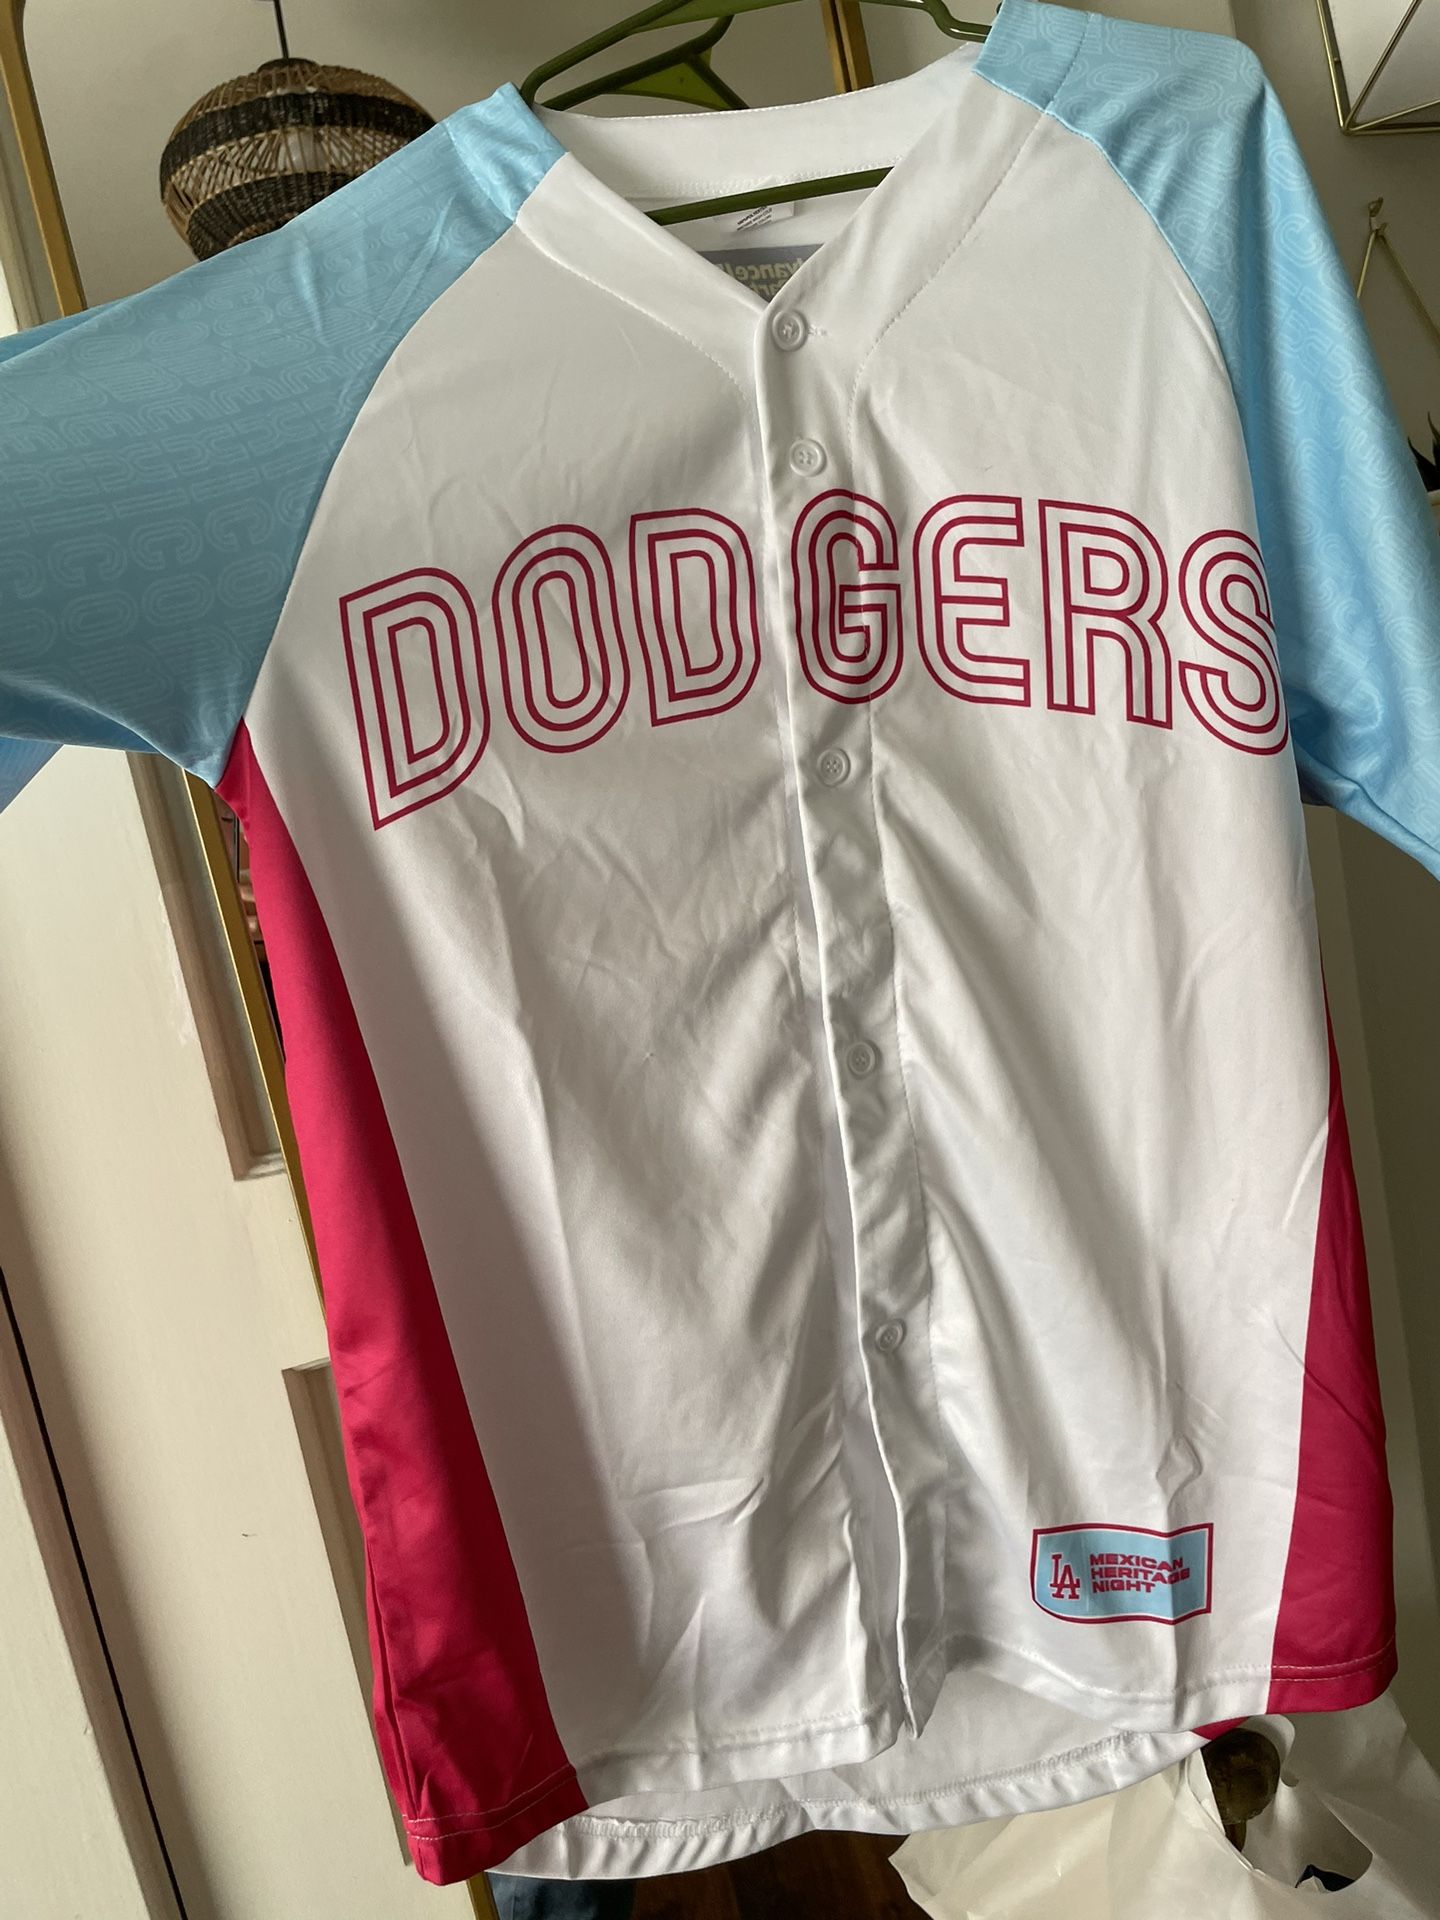 Dodgers Jersey (Mexican Heritage Night) for Sale in Claremont, CA - OfferUp